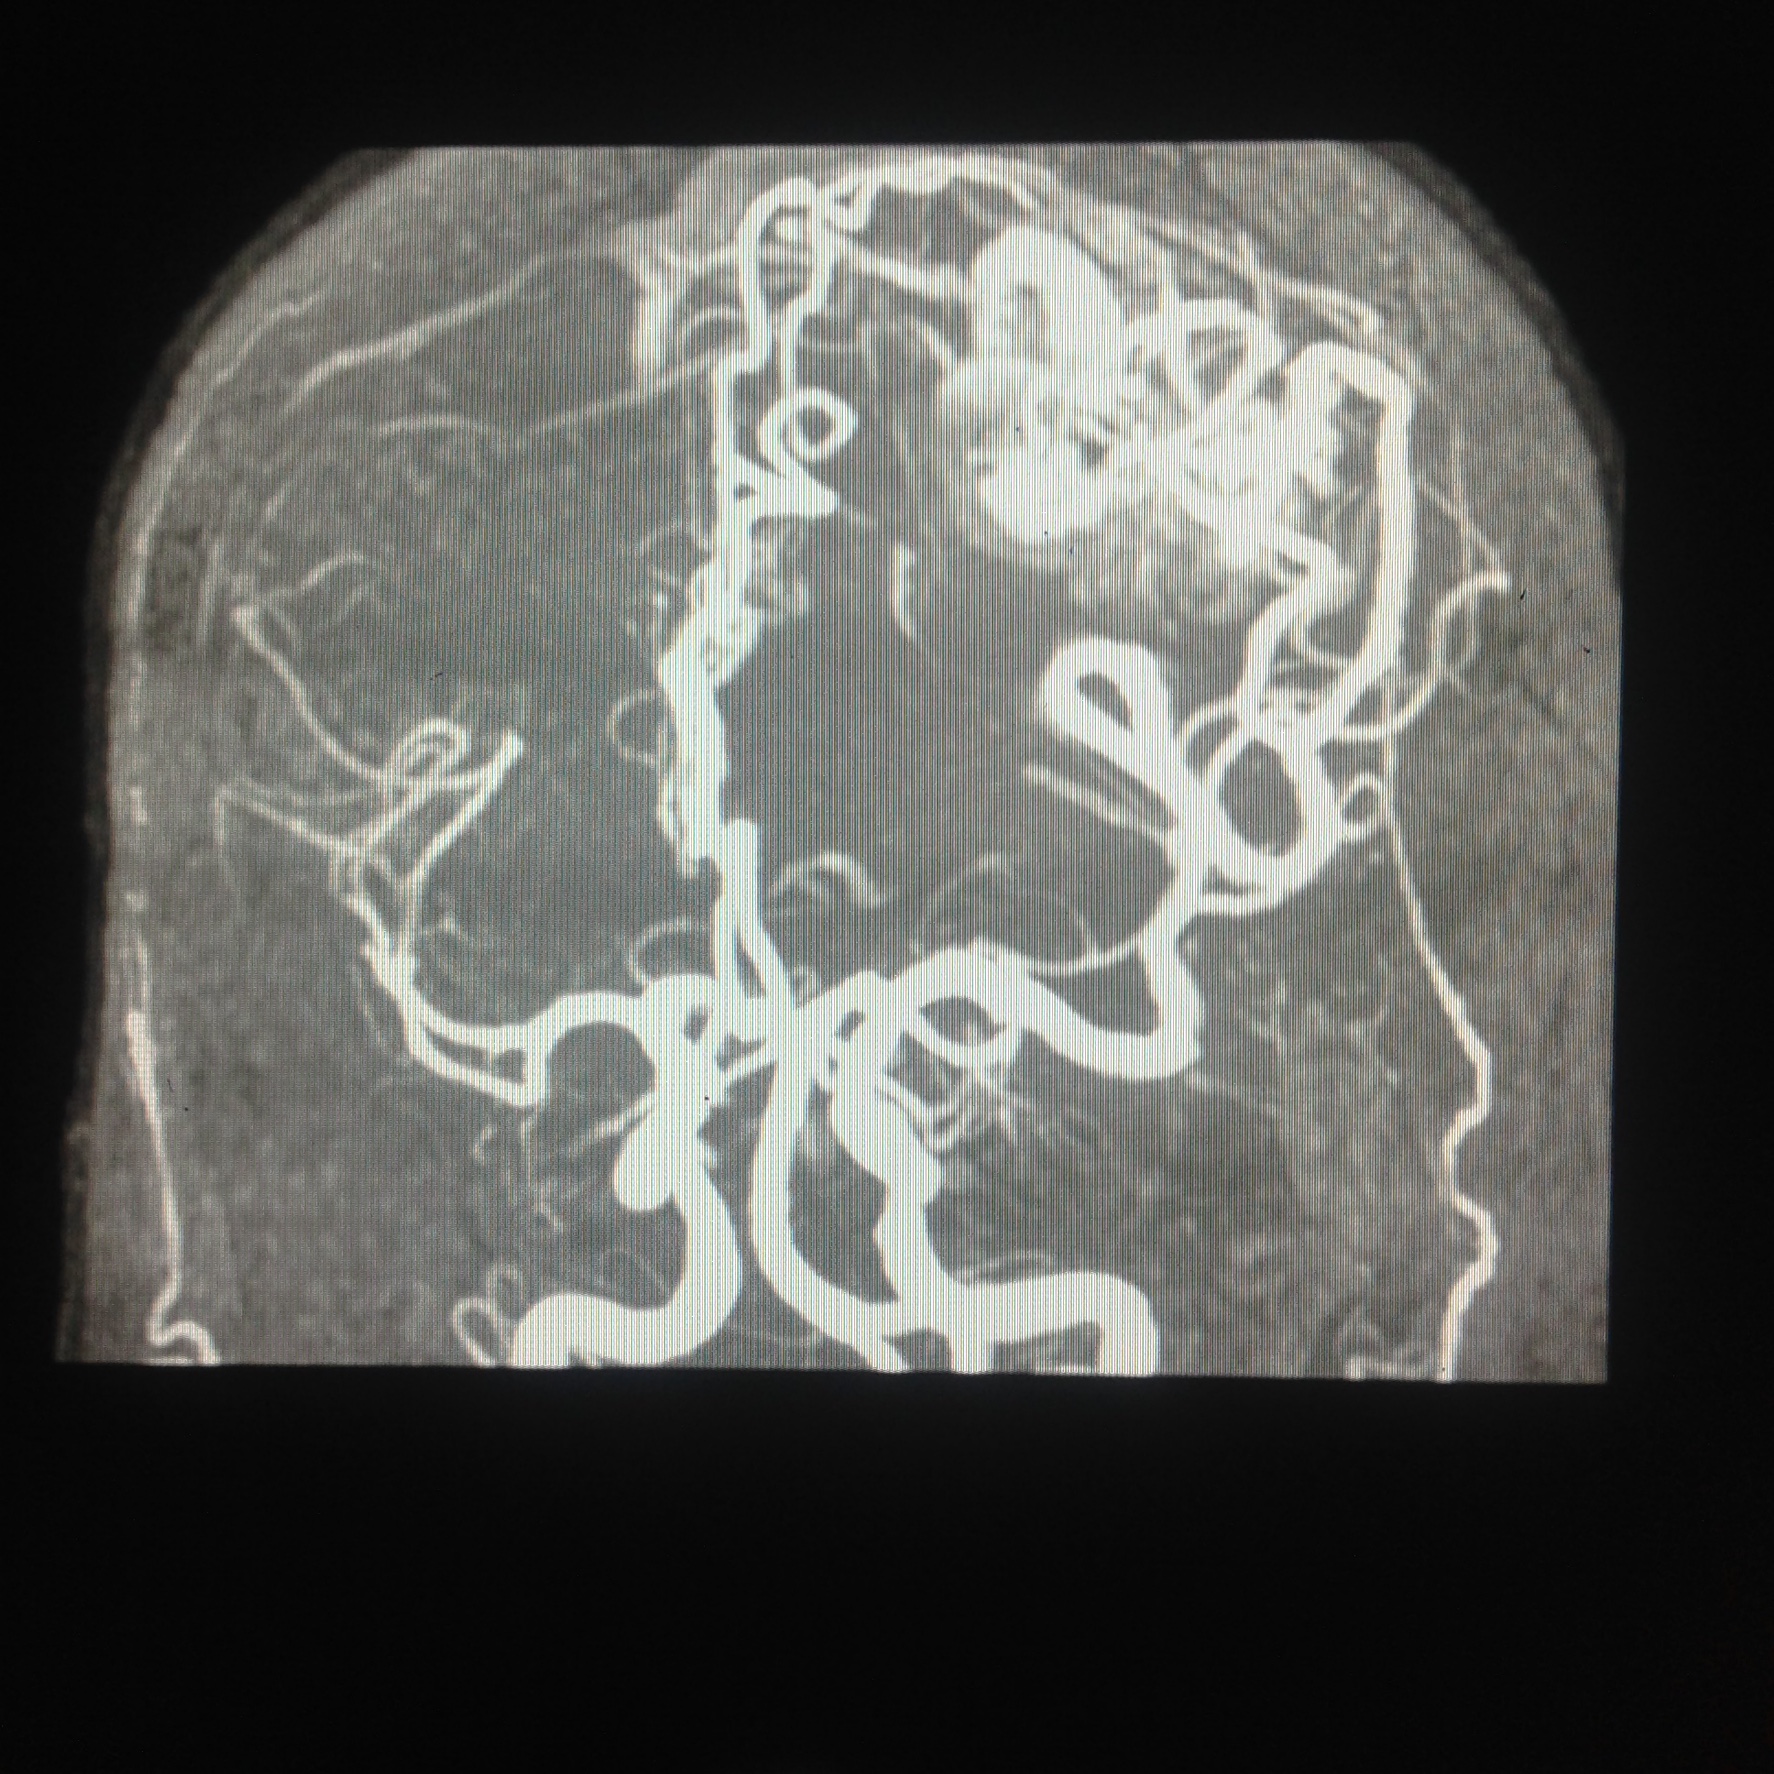 MRA, neovascular bundle receiving supply from middle cerebral artery and early drainage into superficial vein